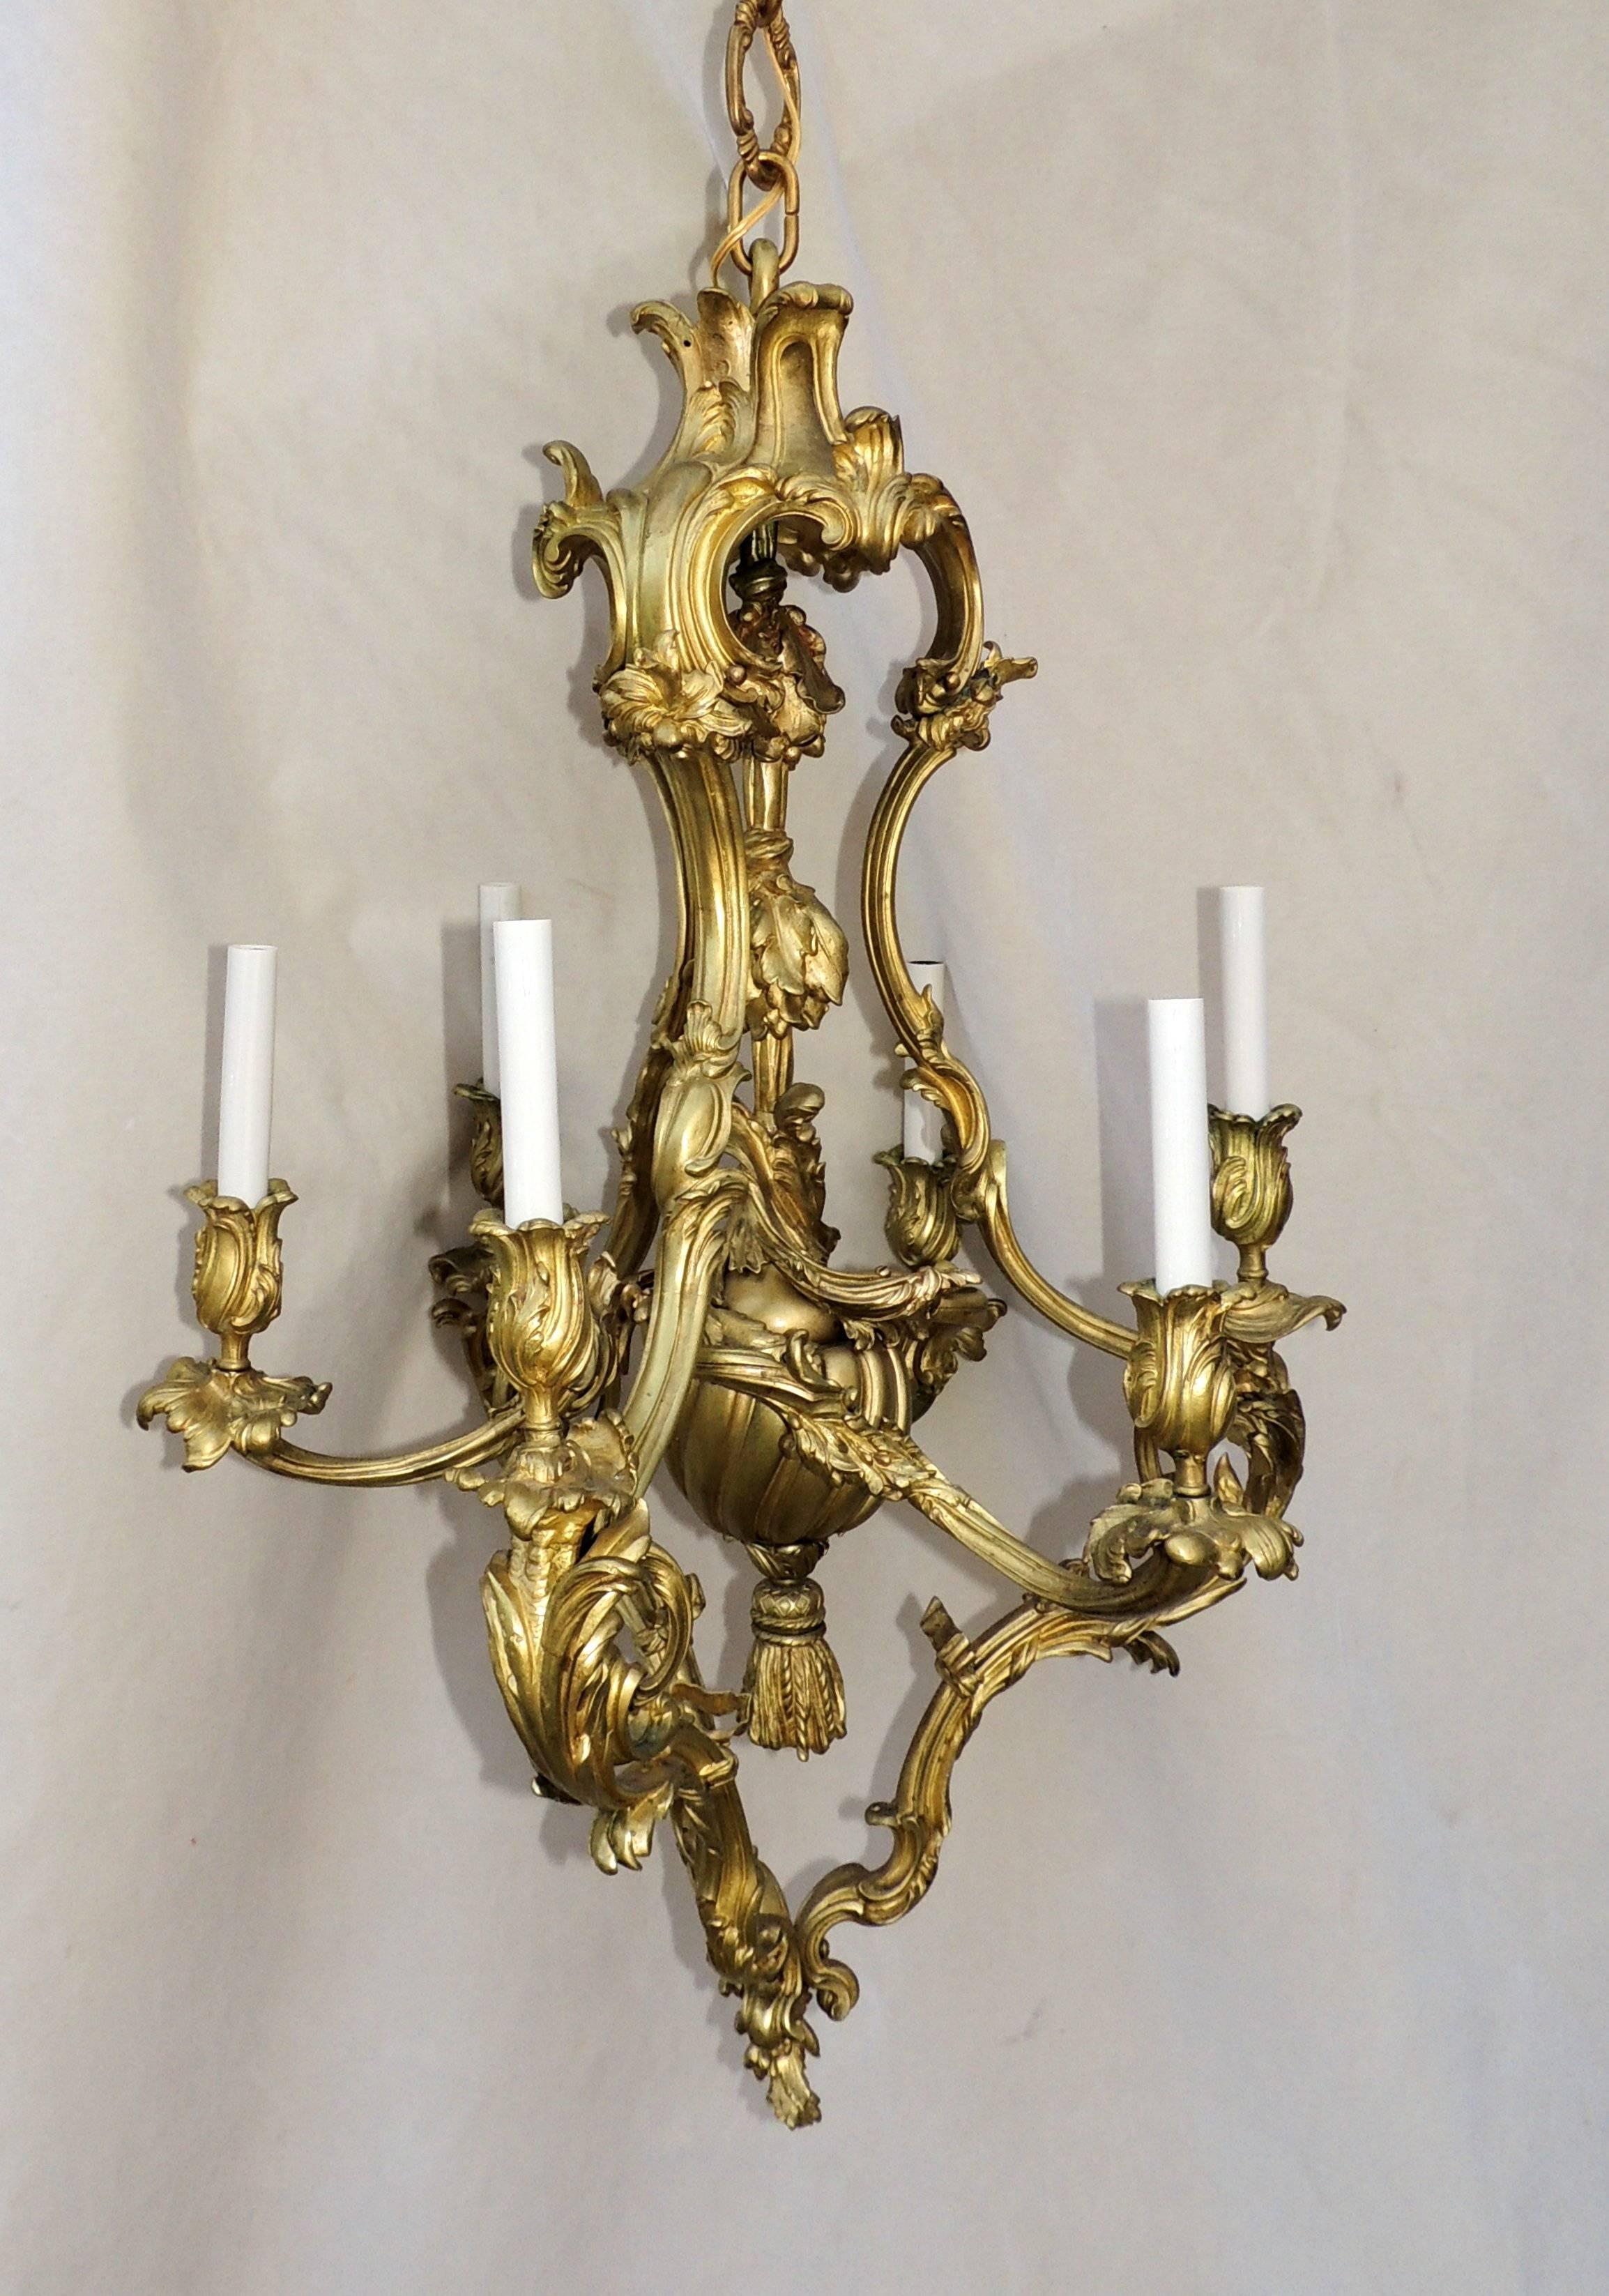 Beautiful leaves envelope the six candle cups and are gracefully layered throughout this large Rococo doré bronze chandelier with tassel accented center.

Measures: 38